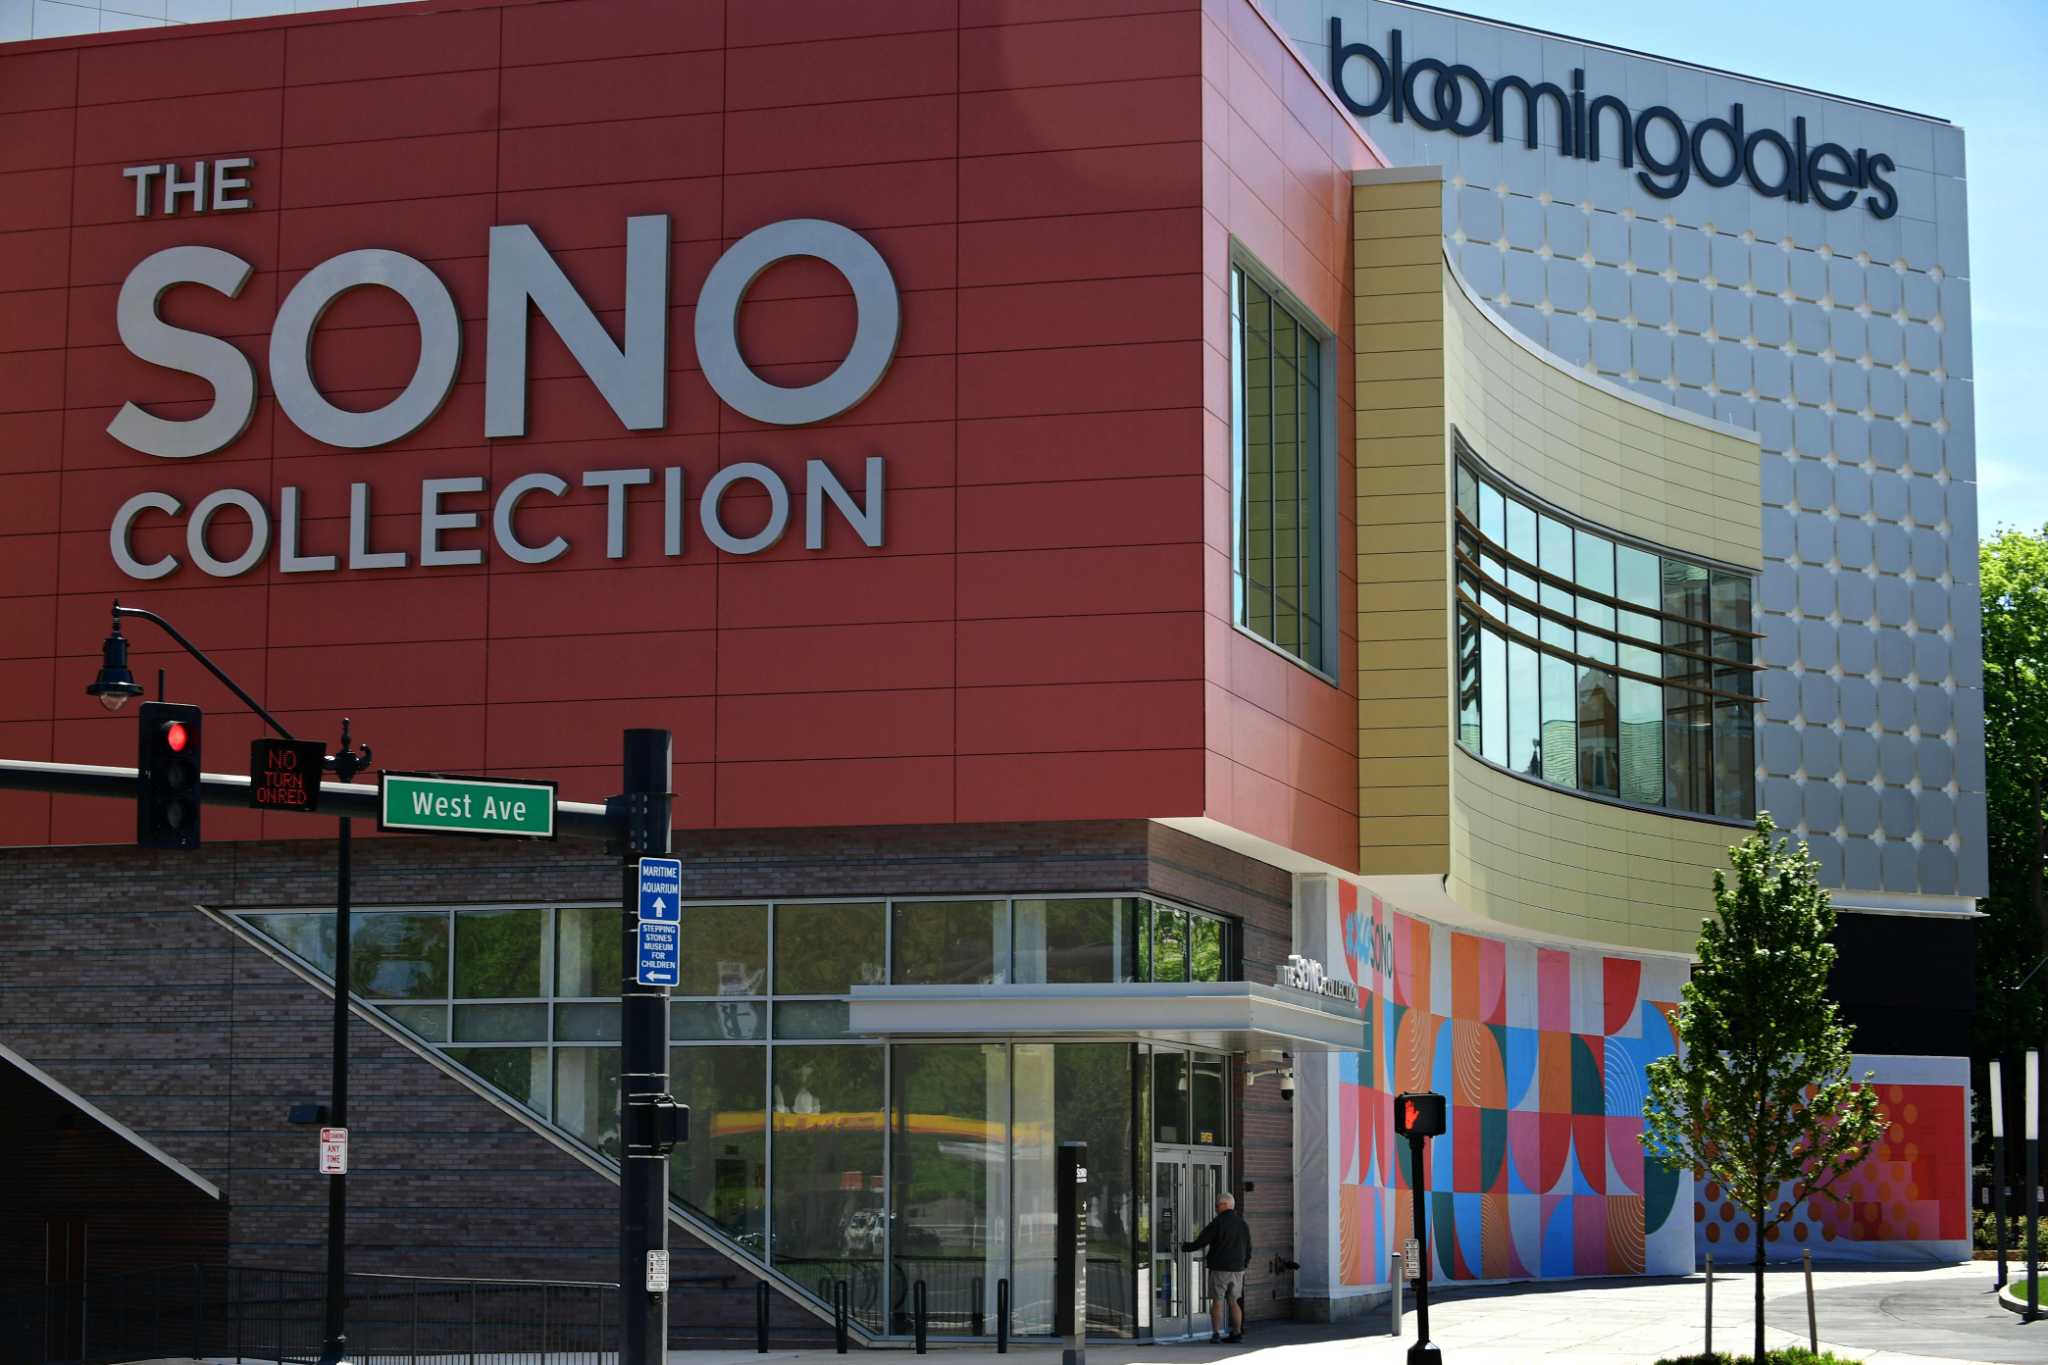 Bloomingdale's Opens New Store In The SoNo Collection